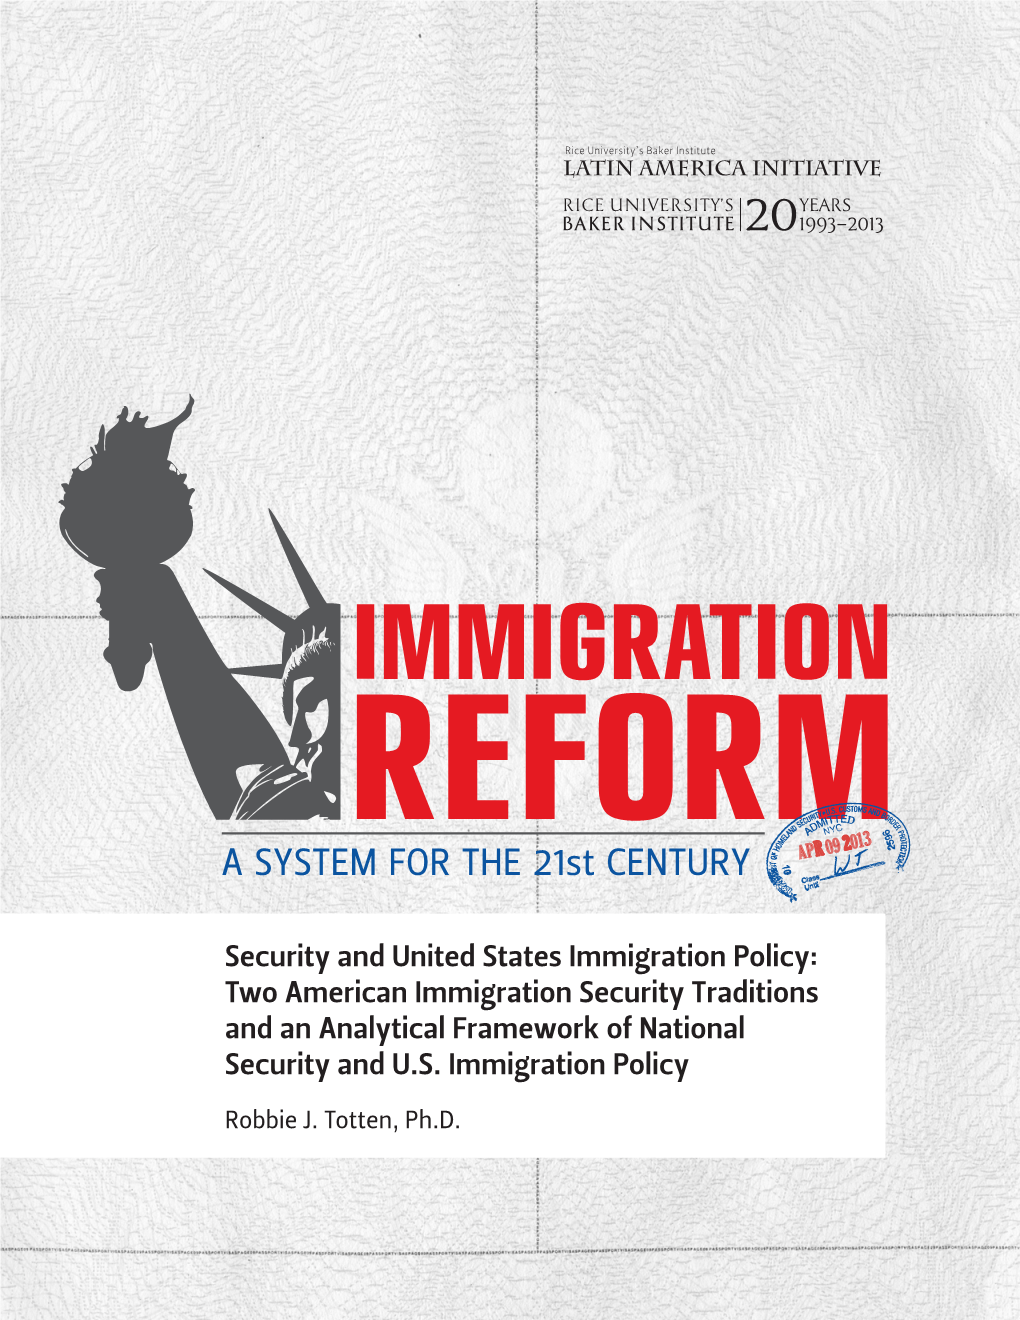 Two American Immigration Security Traditions and an Analytical Framework of National Security and U.S